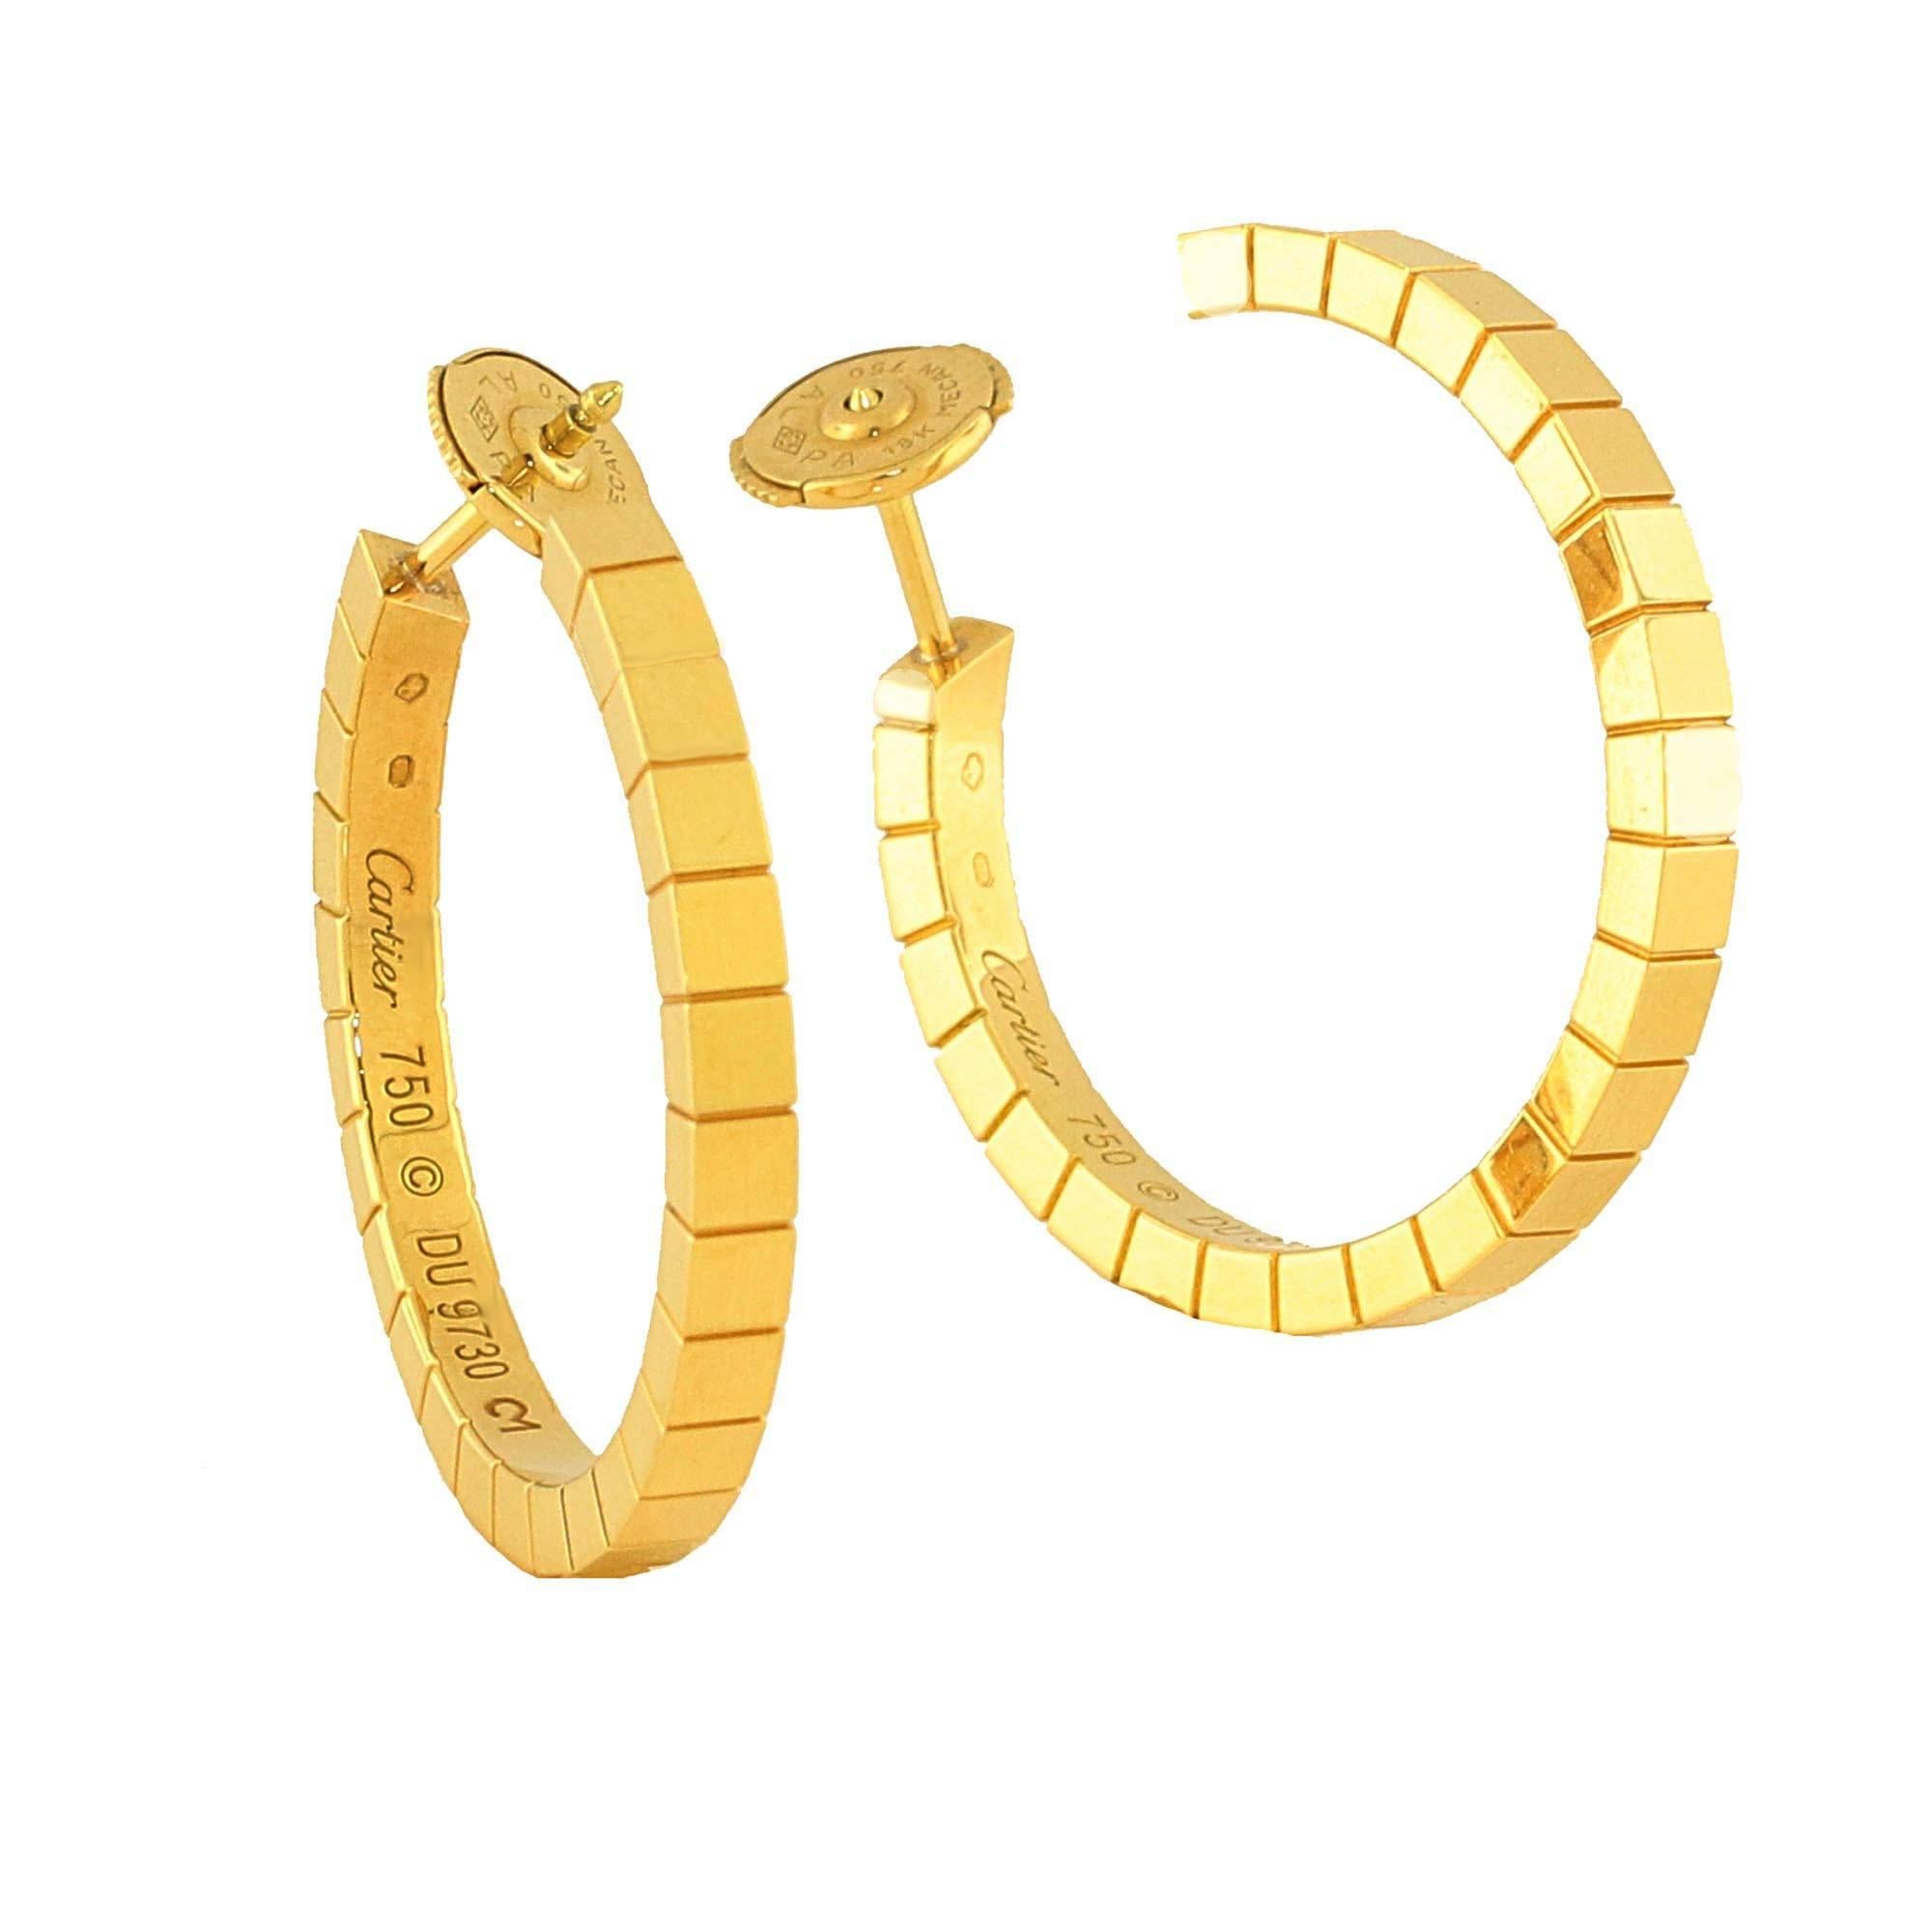 18kt yellow gold Lanieres Hoop Earrings. These earrings are in perfect condition and look as though they have never been worn. Wear them with a fancy dress or your normal day on the town. 

The Earrings have an outer diameter of 30mm. They are 3mm